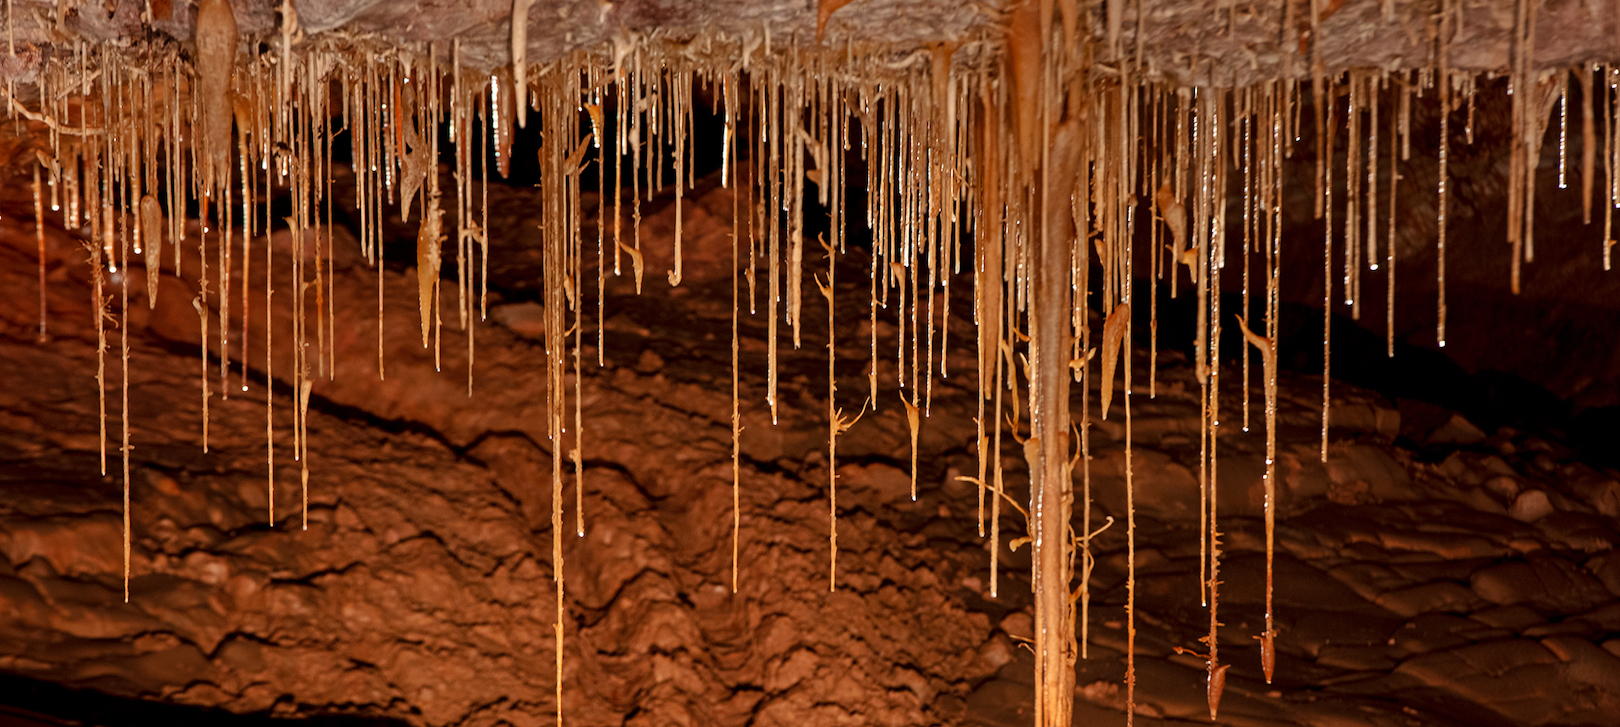 Soda straw formations in the cave at Kartchner Caverns State Park